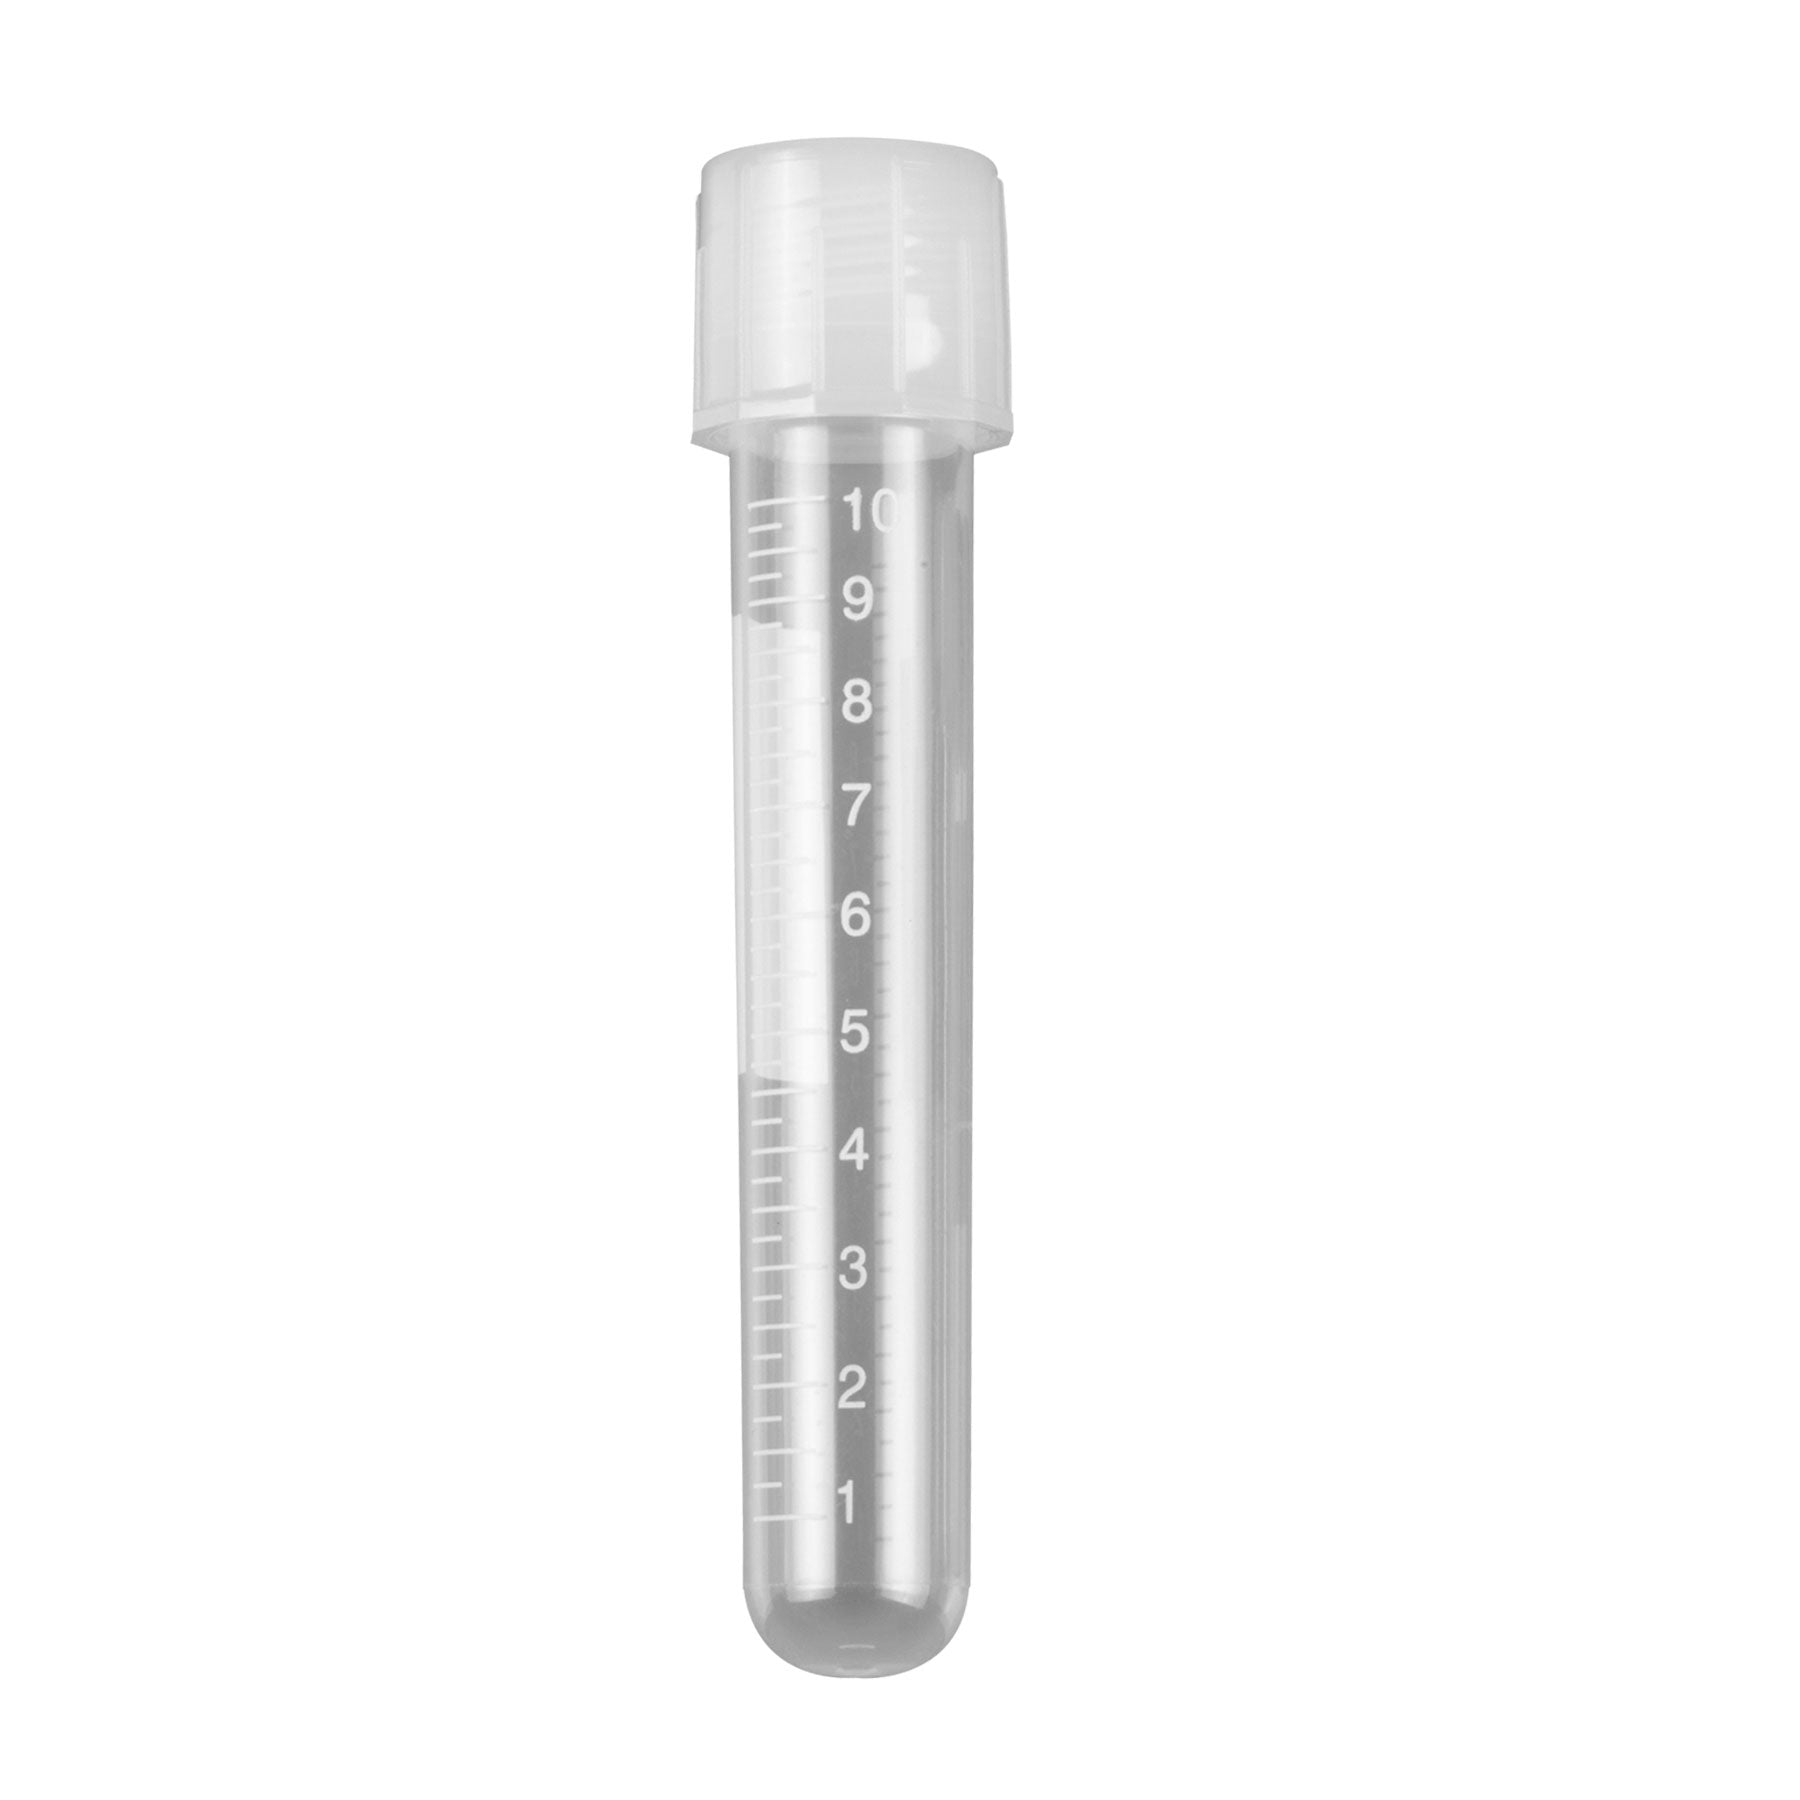 MTC Bio T8850, DuoClick Culture Tube, 14ml, 17 X 100Mm, PP, with Separate 2-Position Screw-Cap, Non-Sterile, Non-Graduated, 1000 Tubes And Capped Bulk Packed Separately